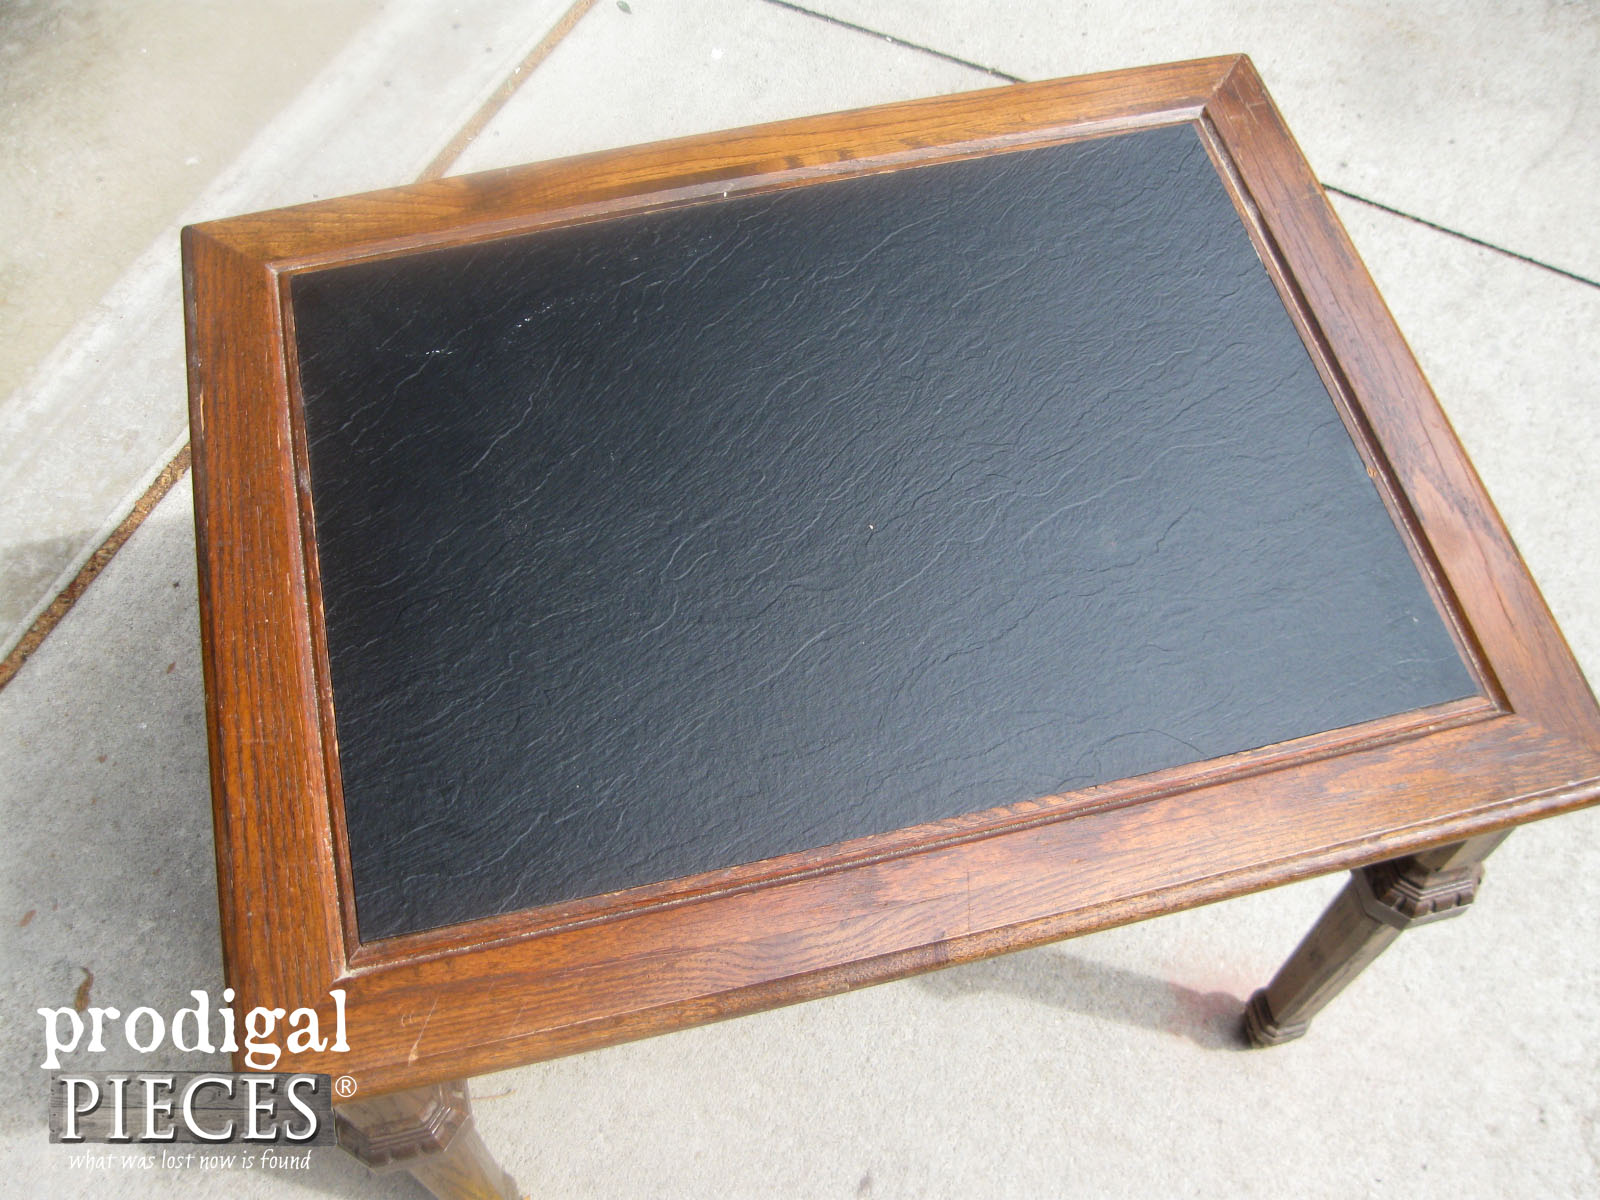 Top of Vintage Mersman Side Table with Faux Textured Top | Prodigal Pieces | www.prodigalpieces.com